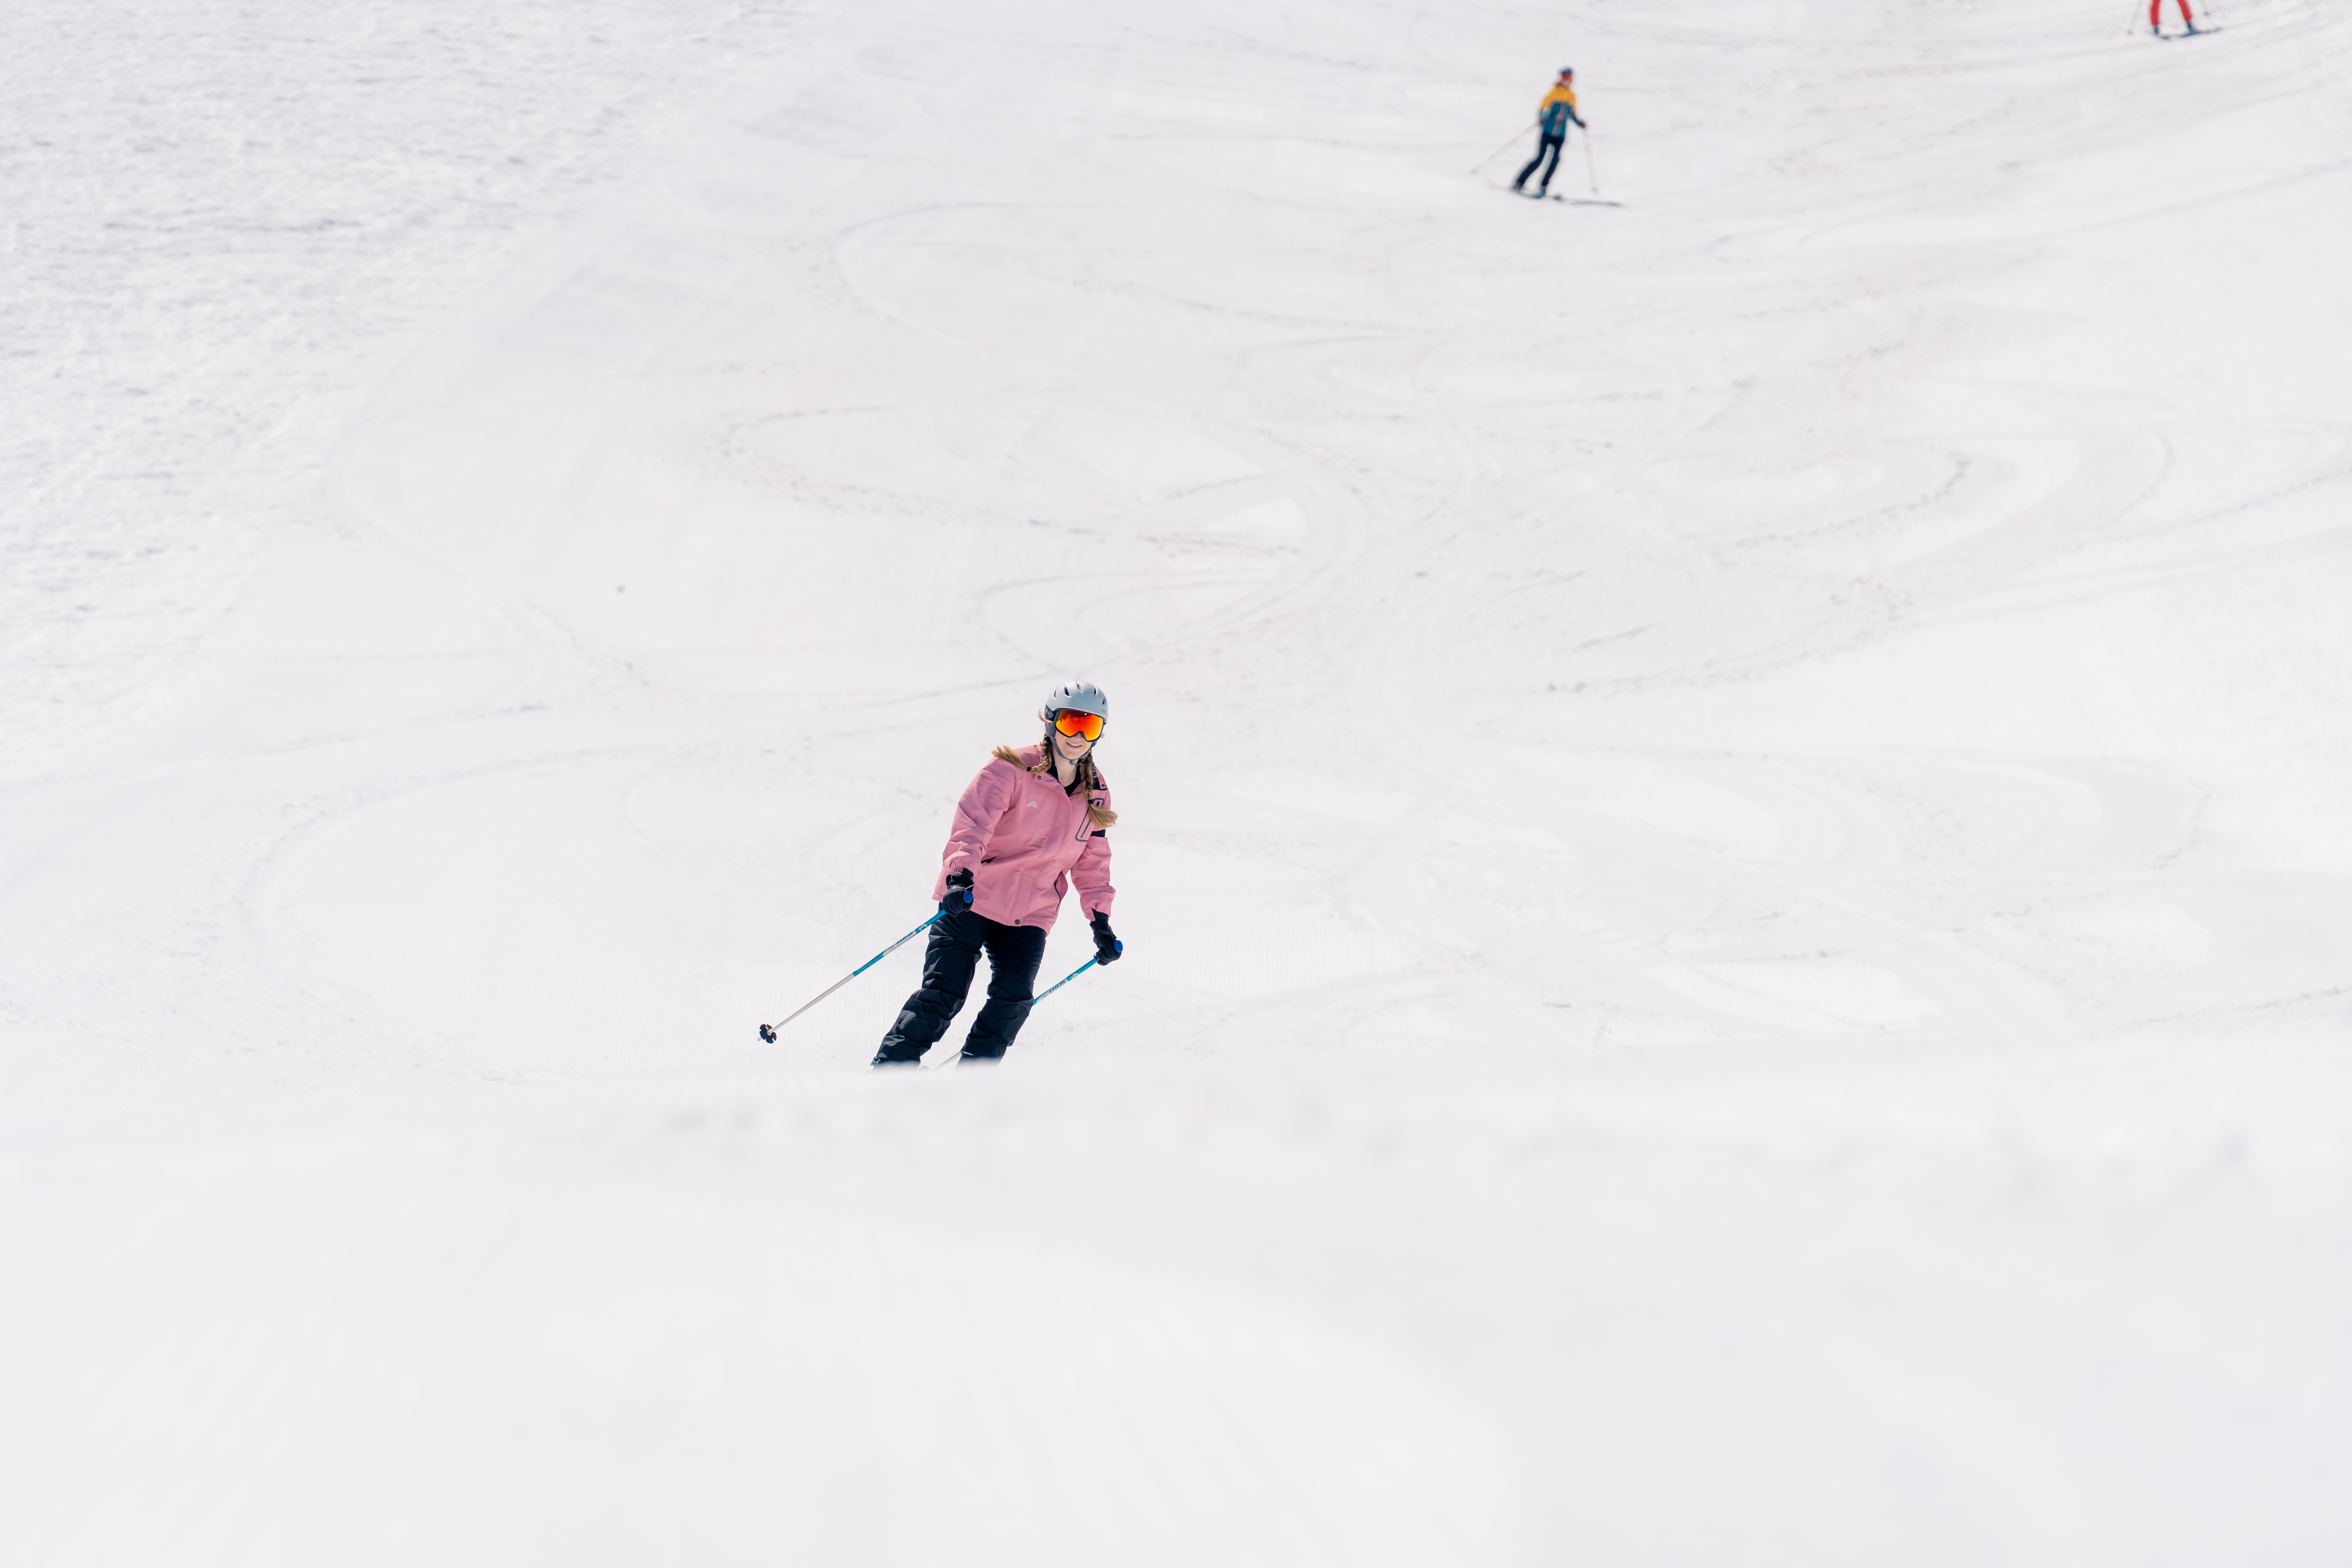 a person skiing down a snowy hill